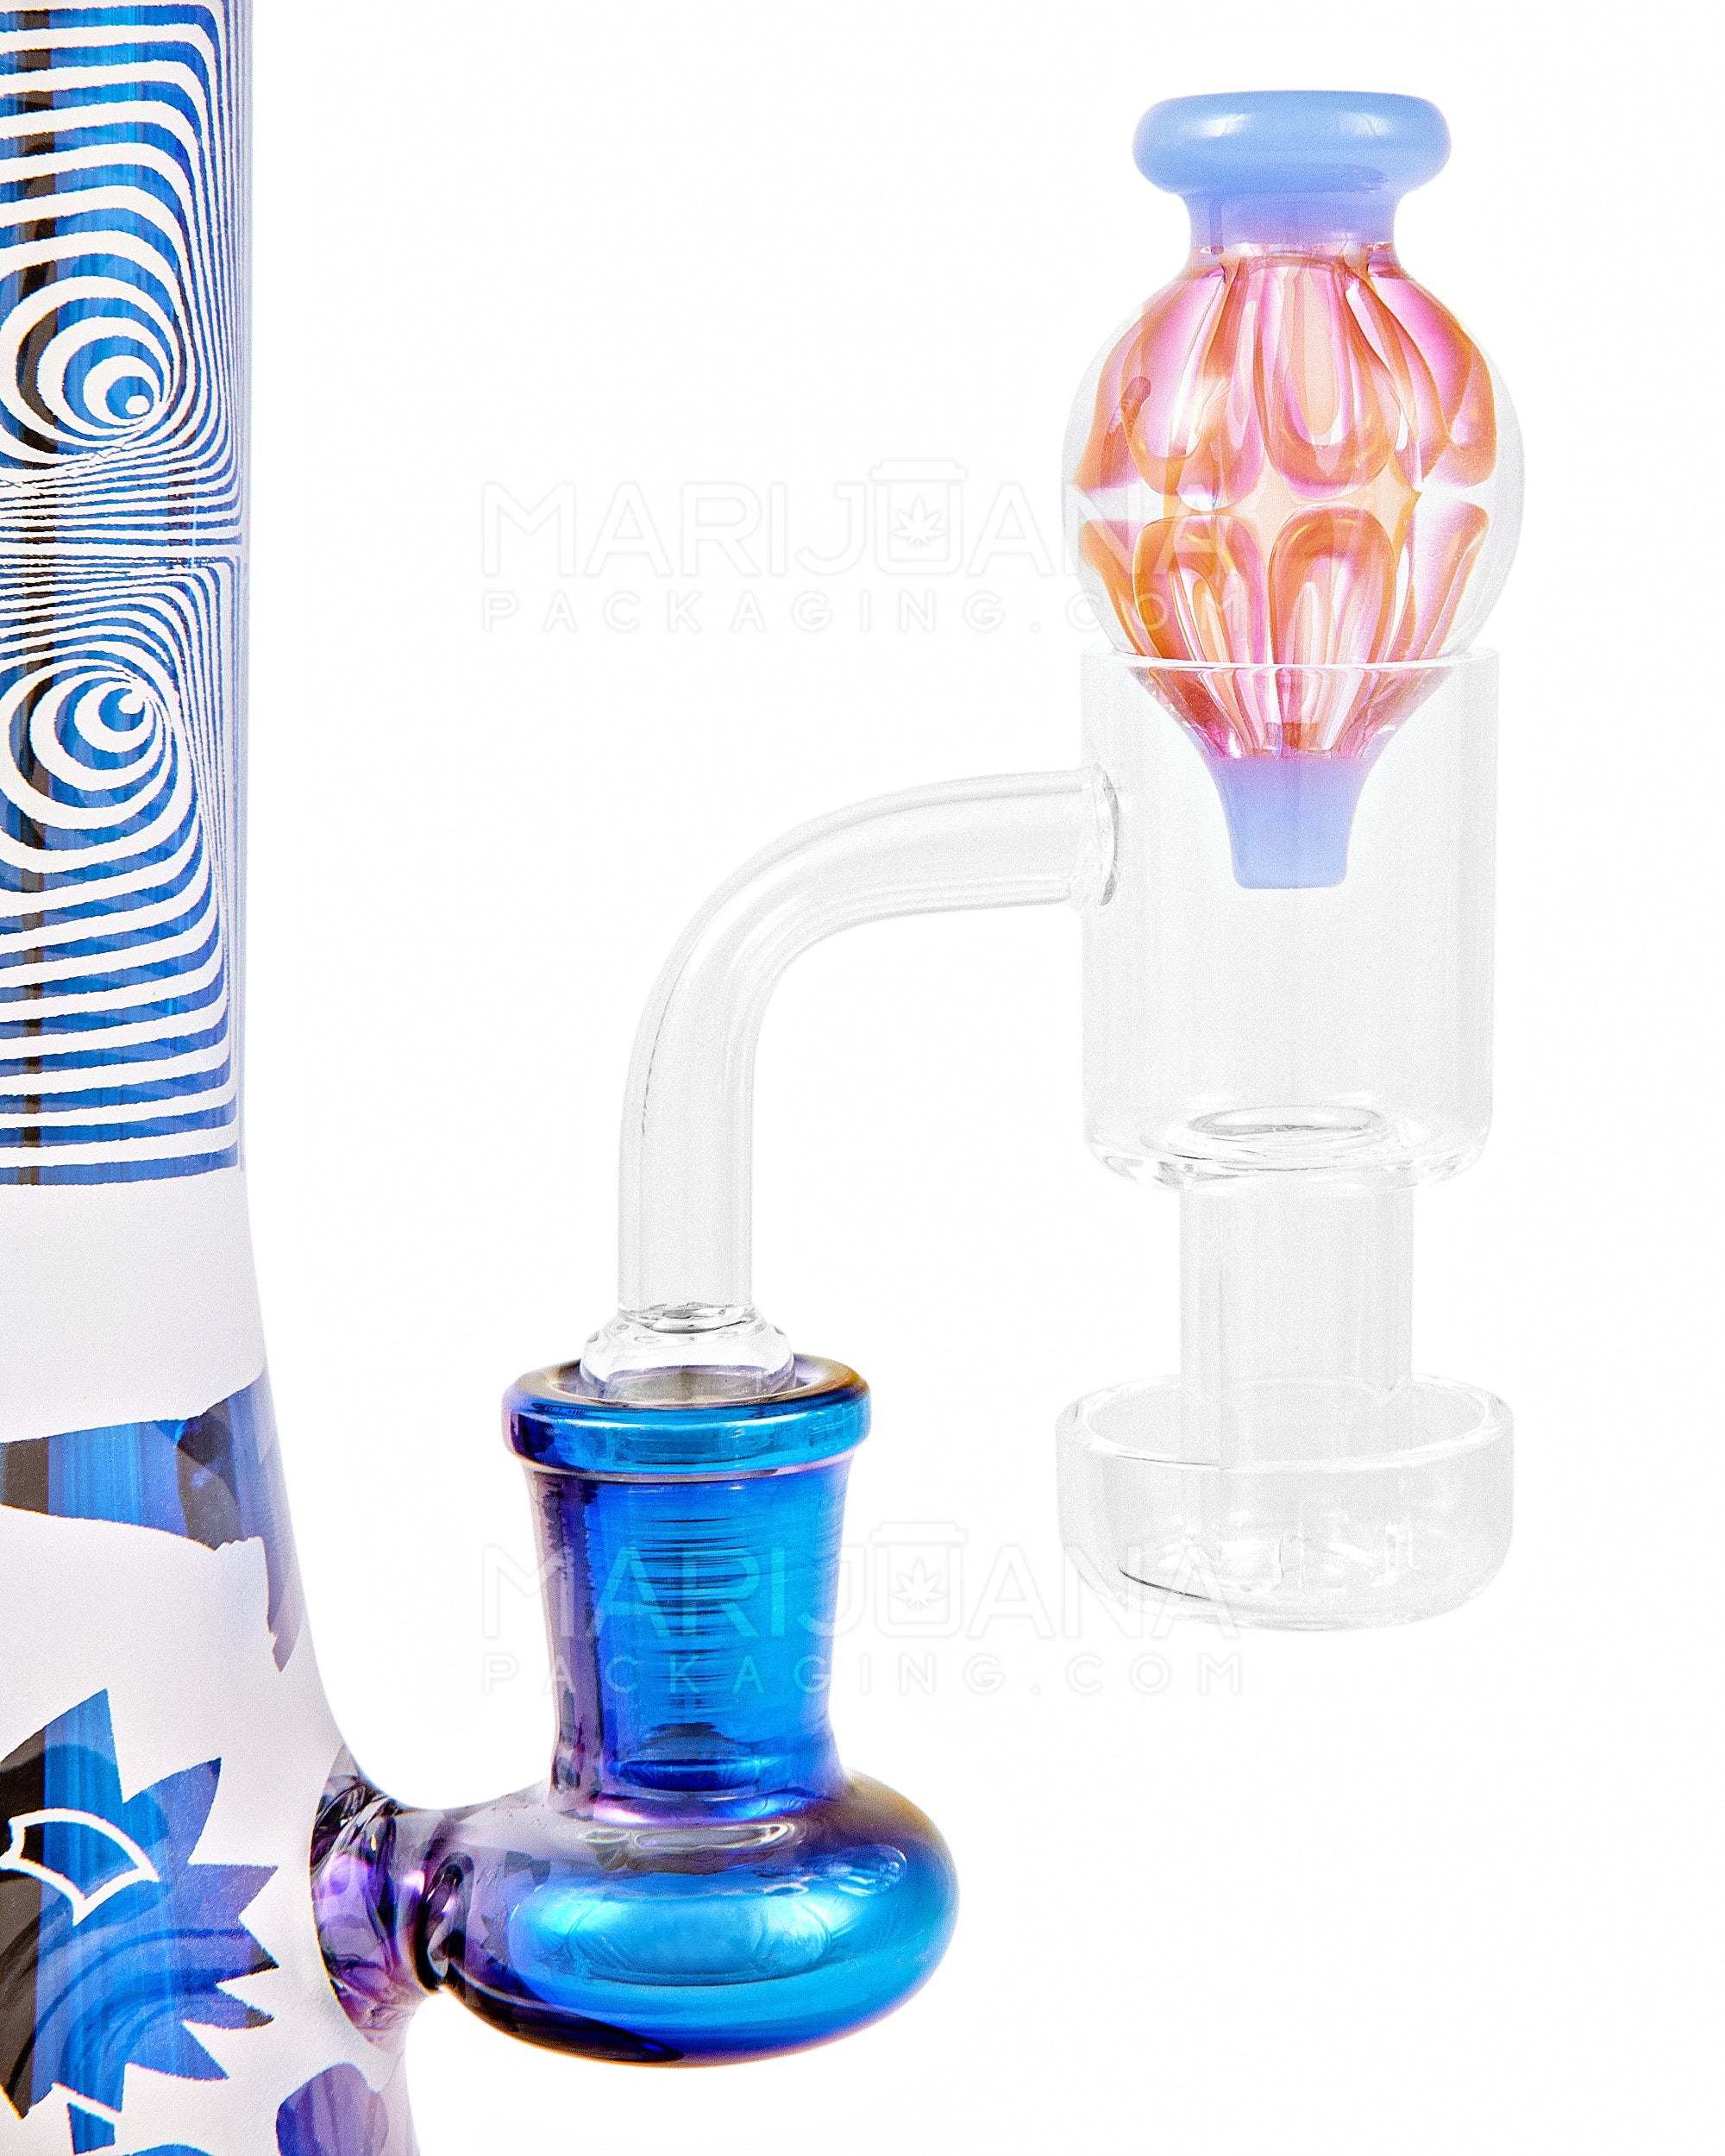 Fumed & Trapped Swirl Bubble Carb Cap | 25mm - Glass - Assorted - 9